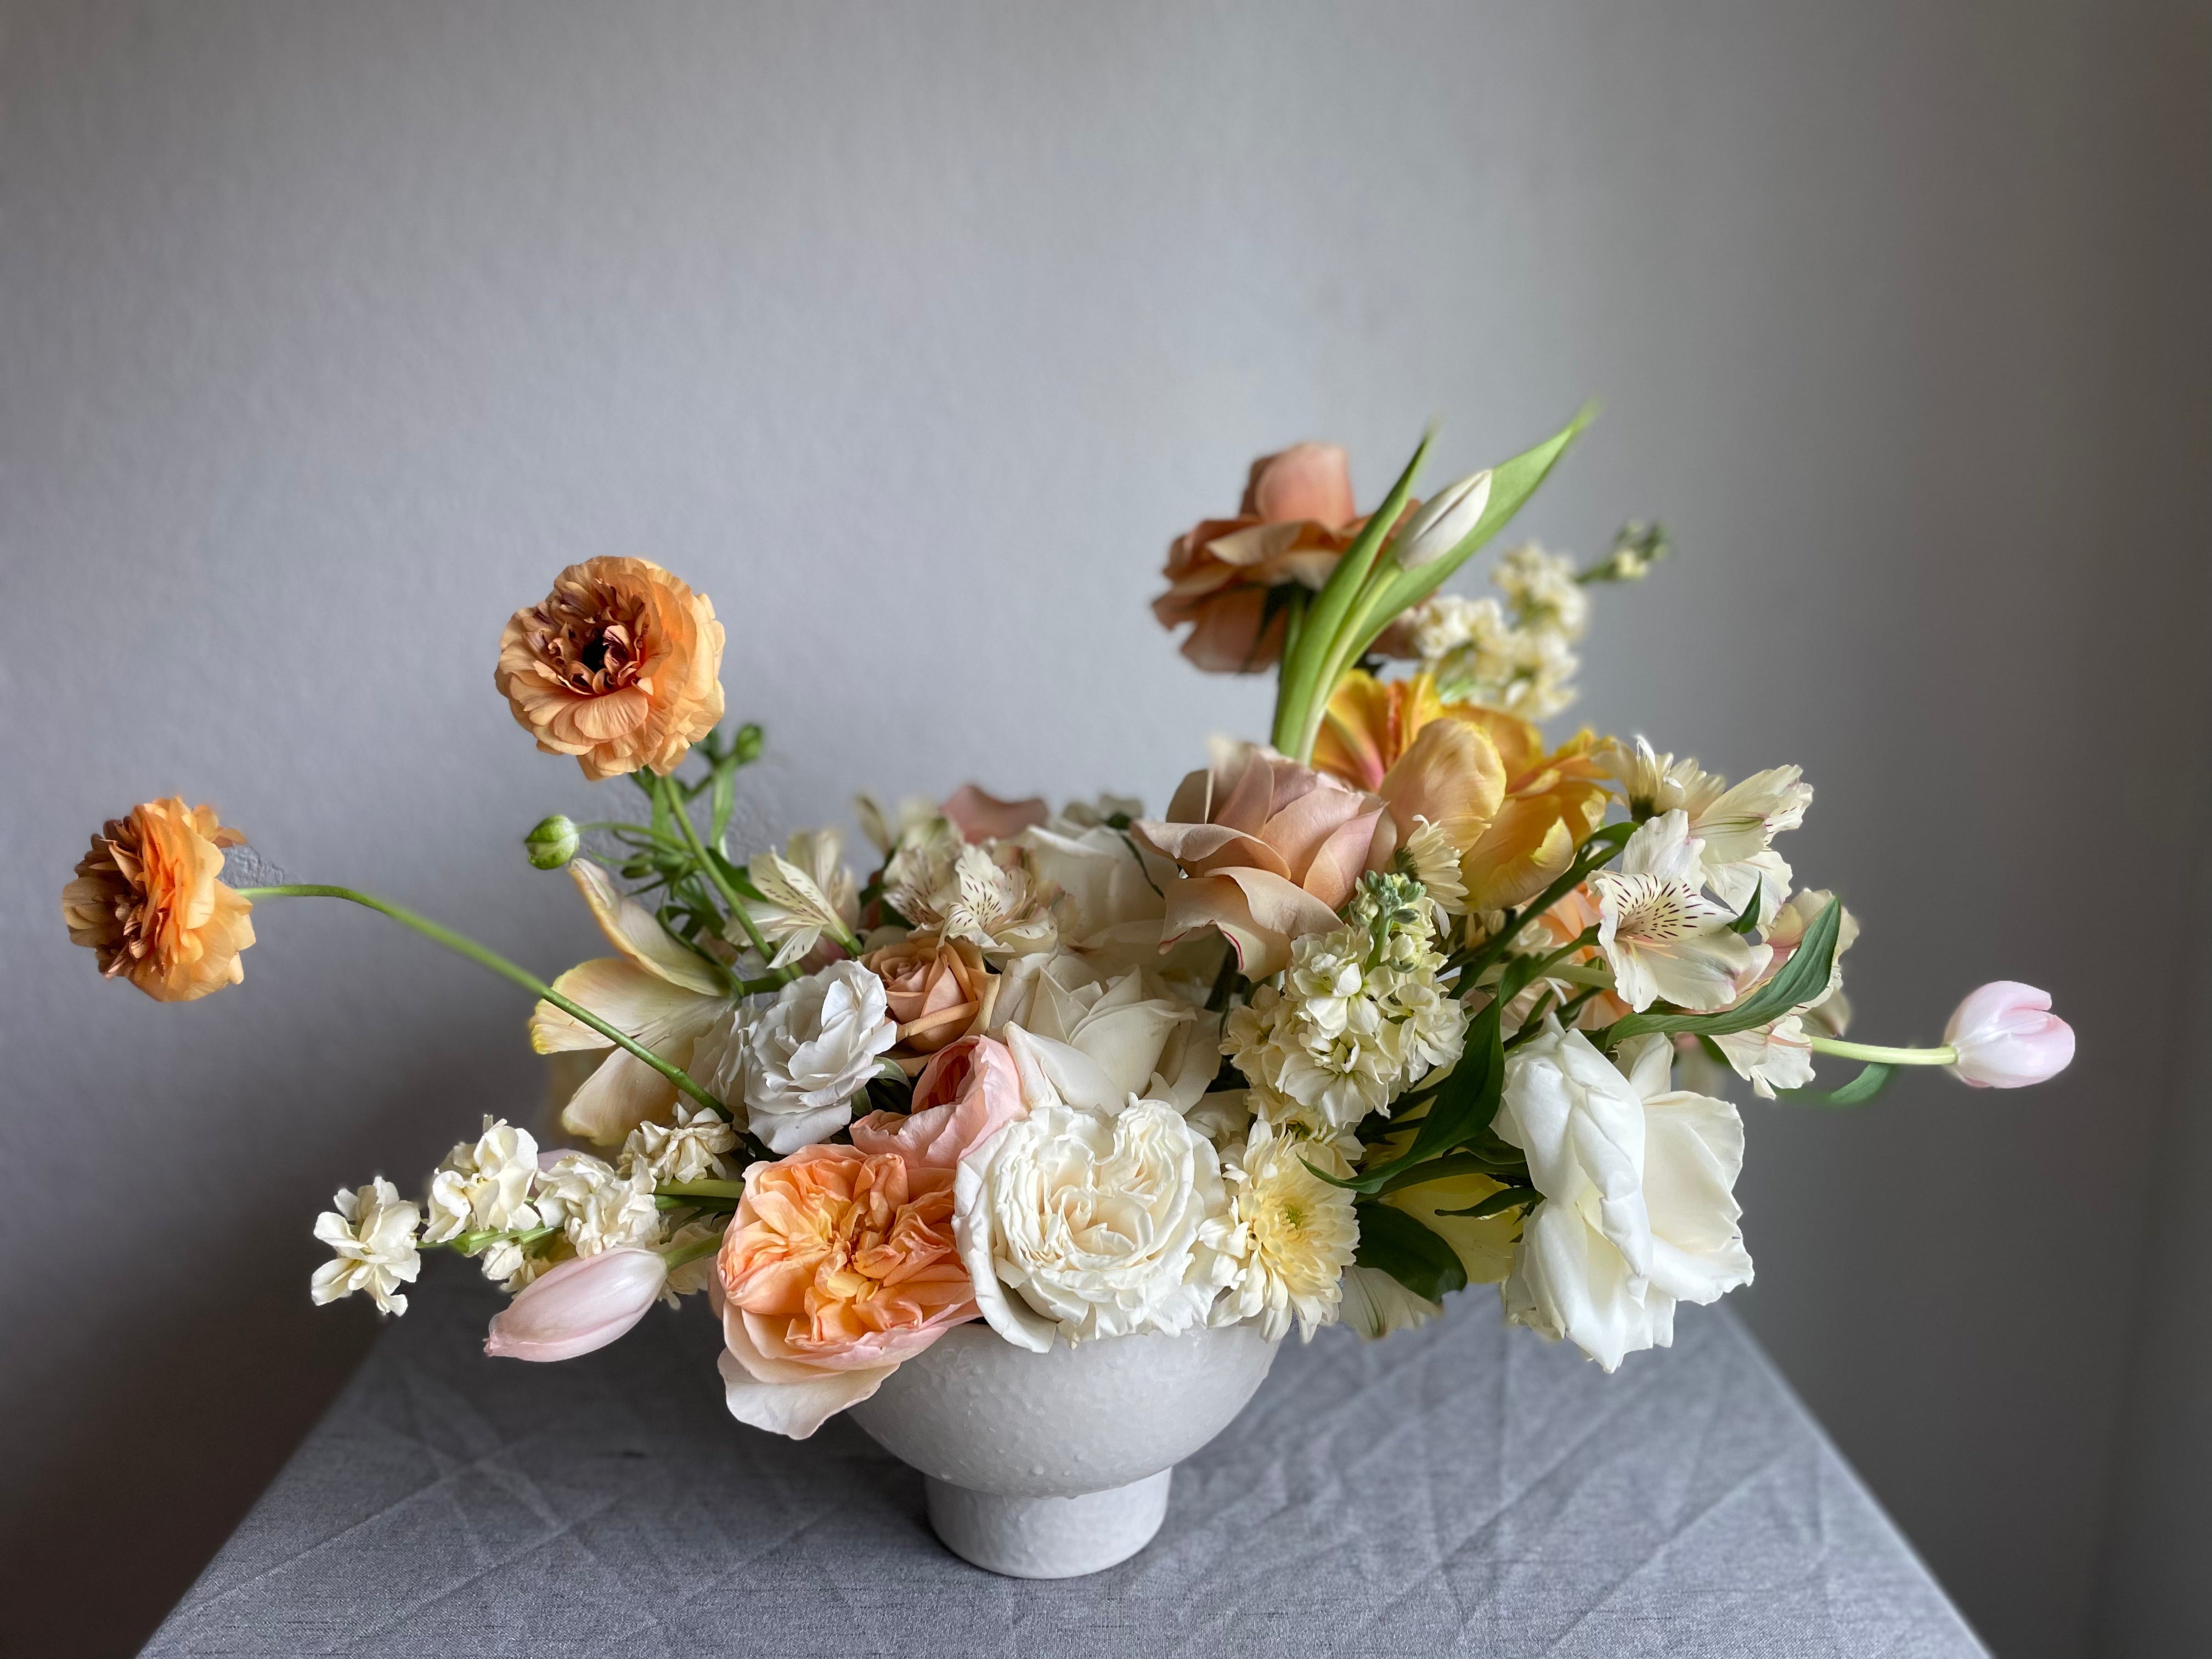 fine art floral design, using seasonal and locally sourced flowers